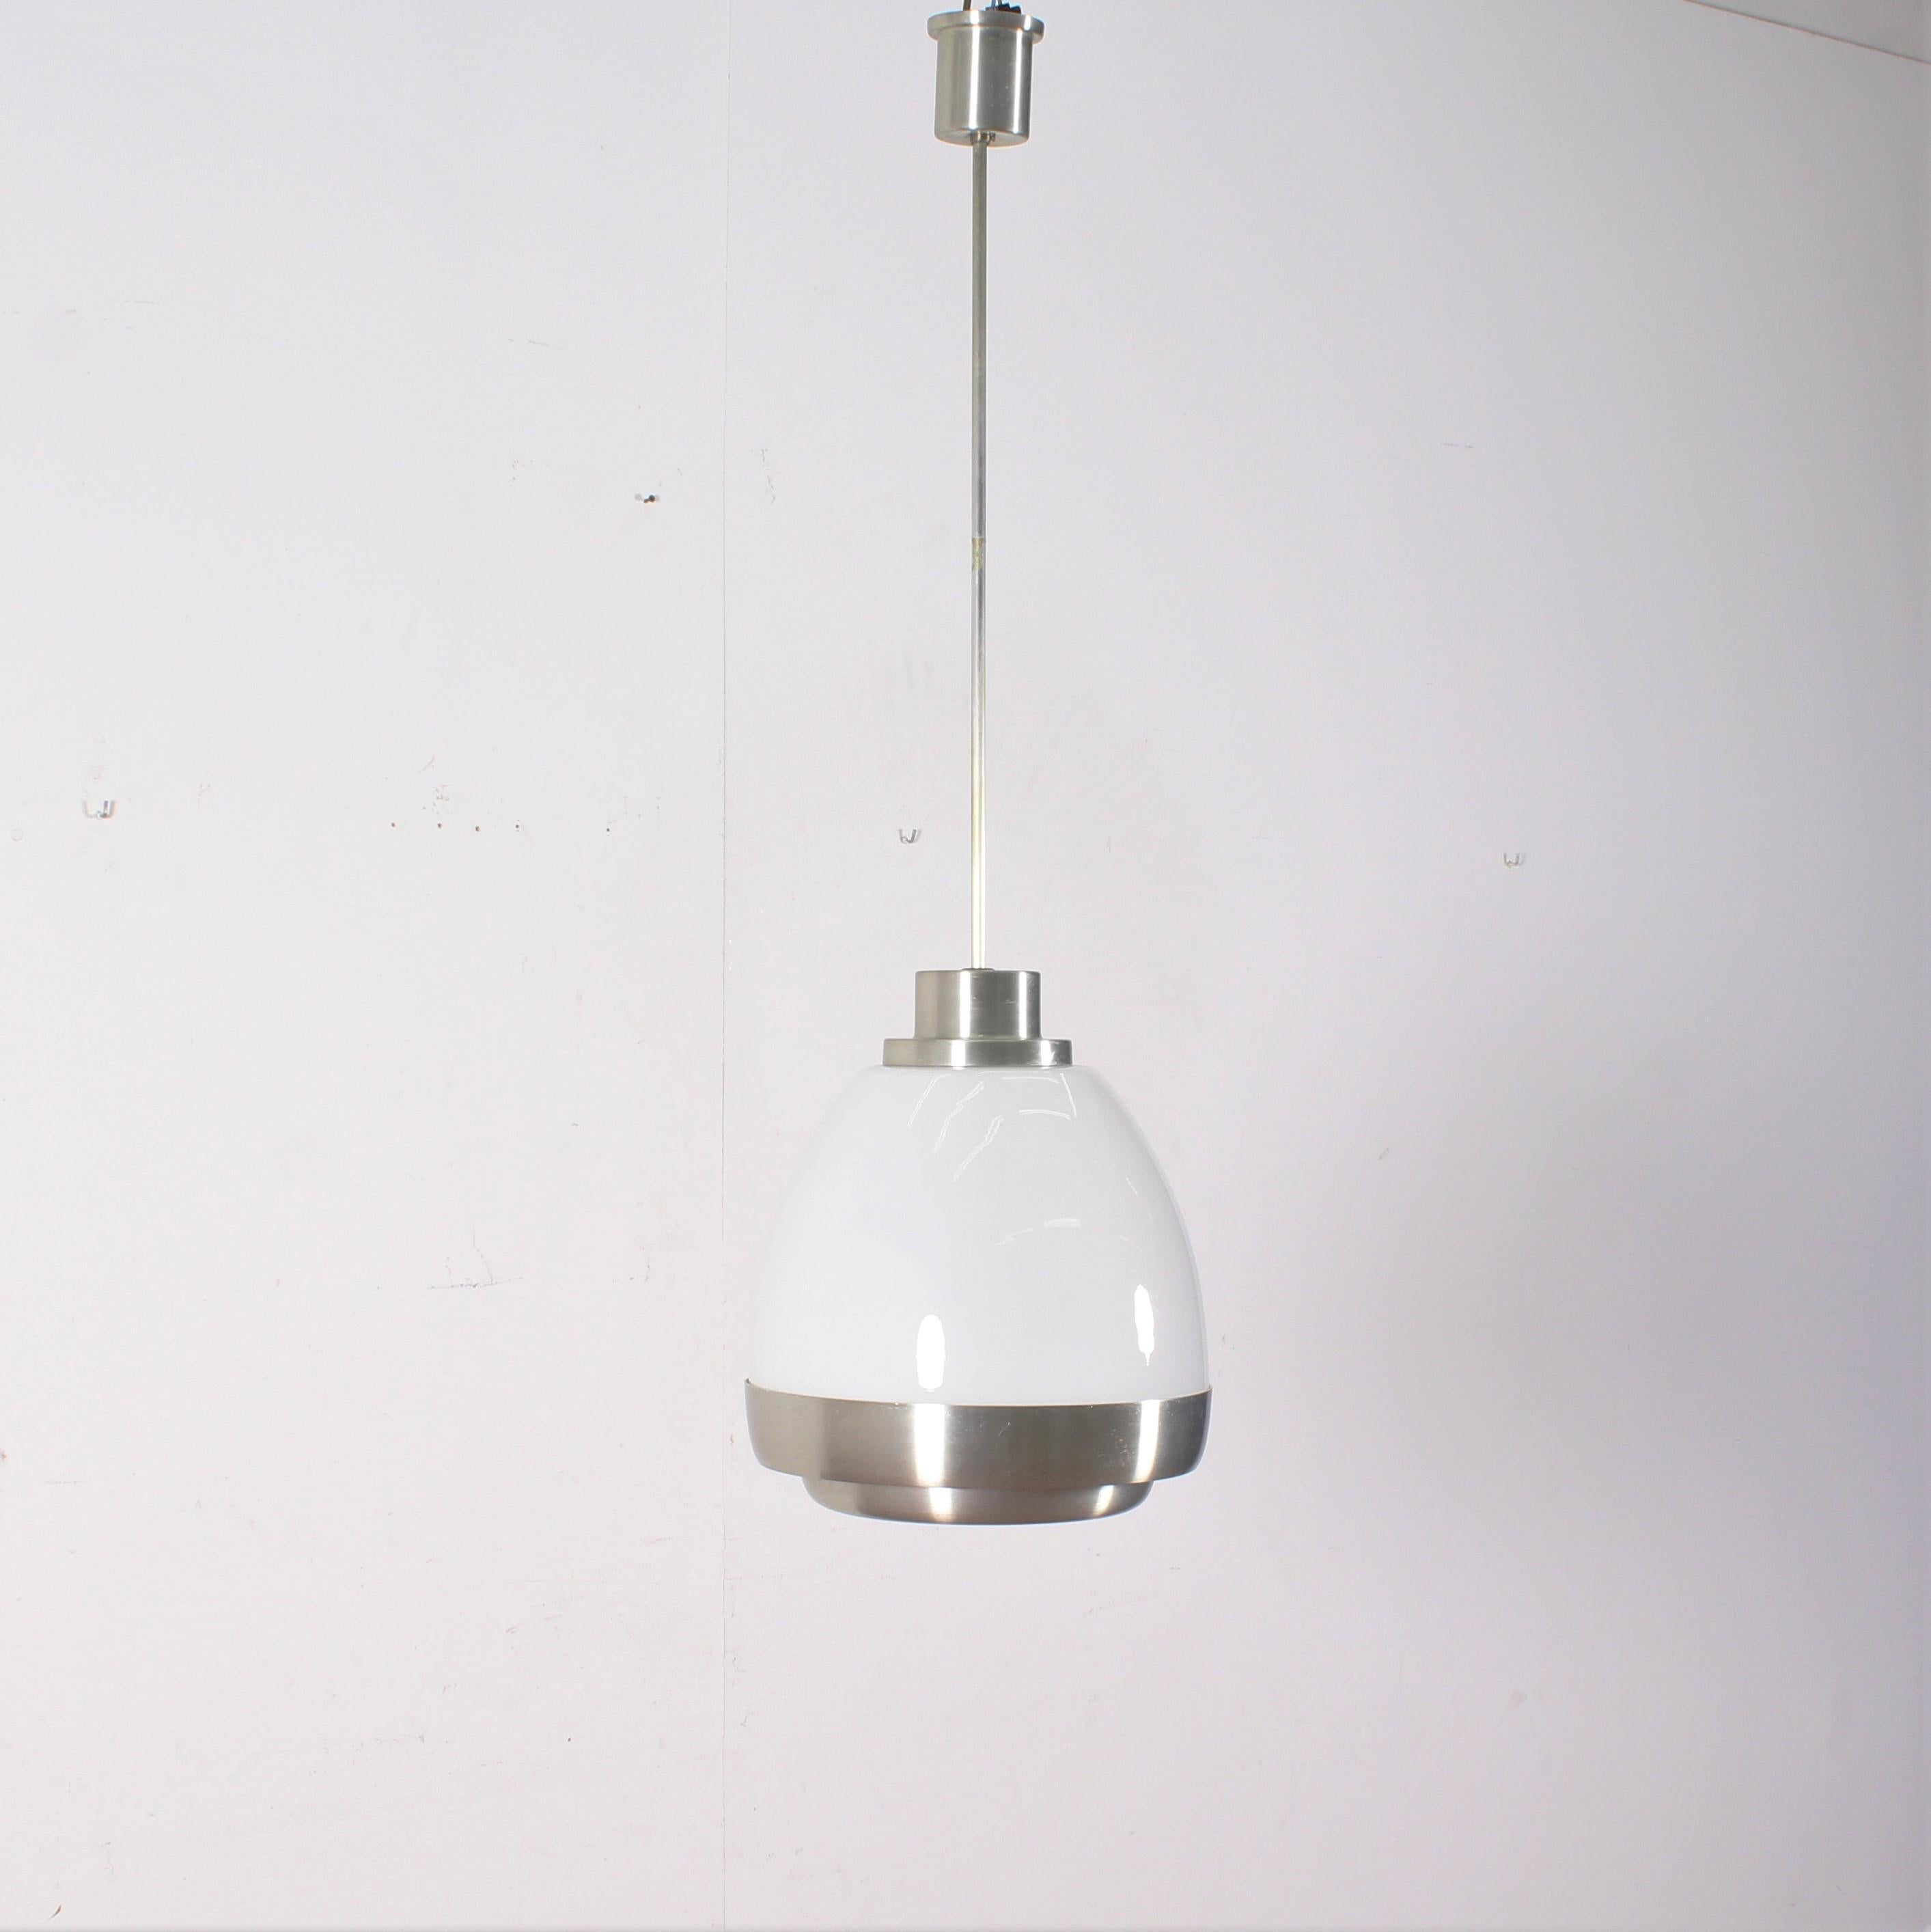 Beautiful suspension lamp in white opal glass was designed by Pia Guidetti Crippa and produced by Lumi in the 1970s. It has a satin aluminum structure with an underlying glass diffuser.
Wear consistent with age and use.